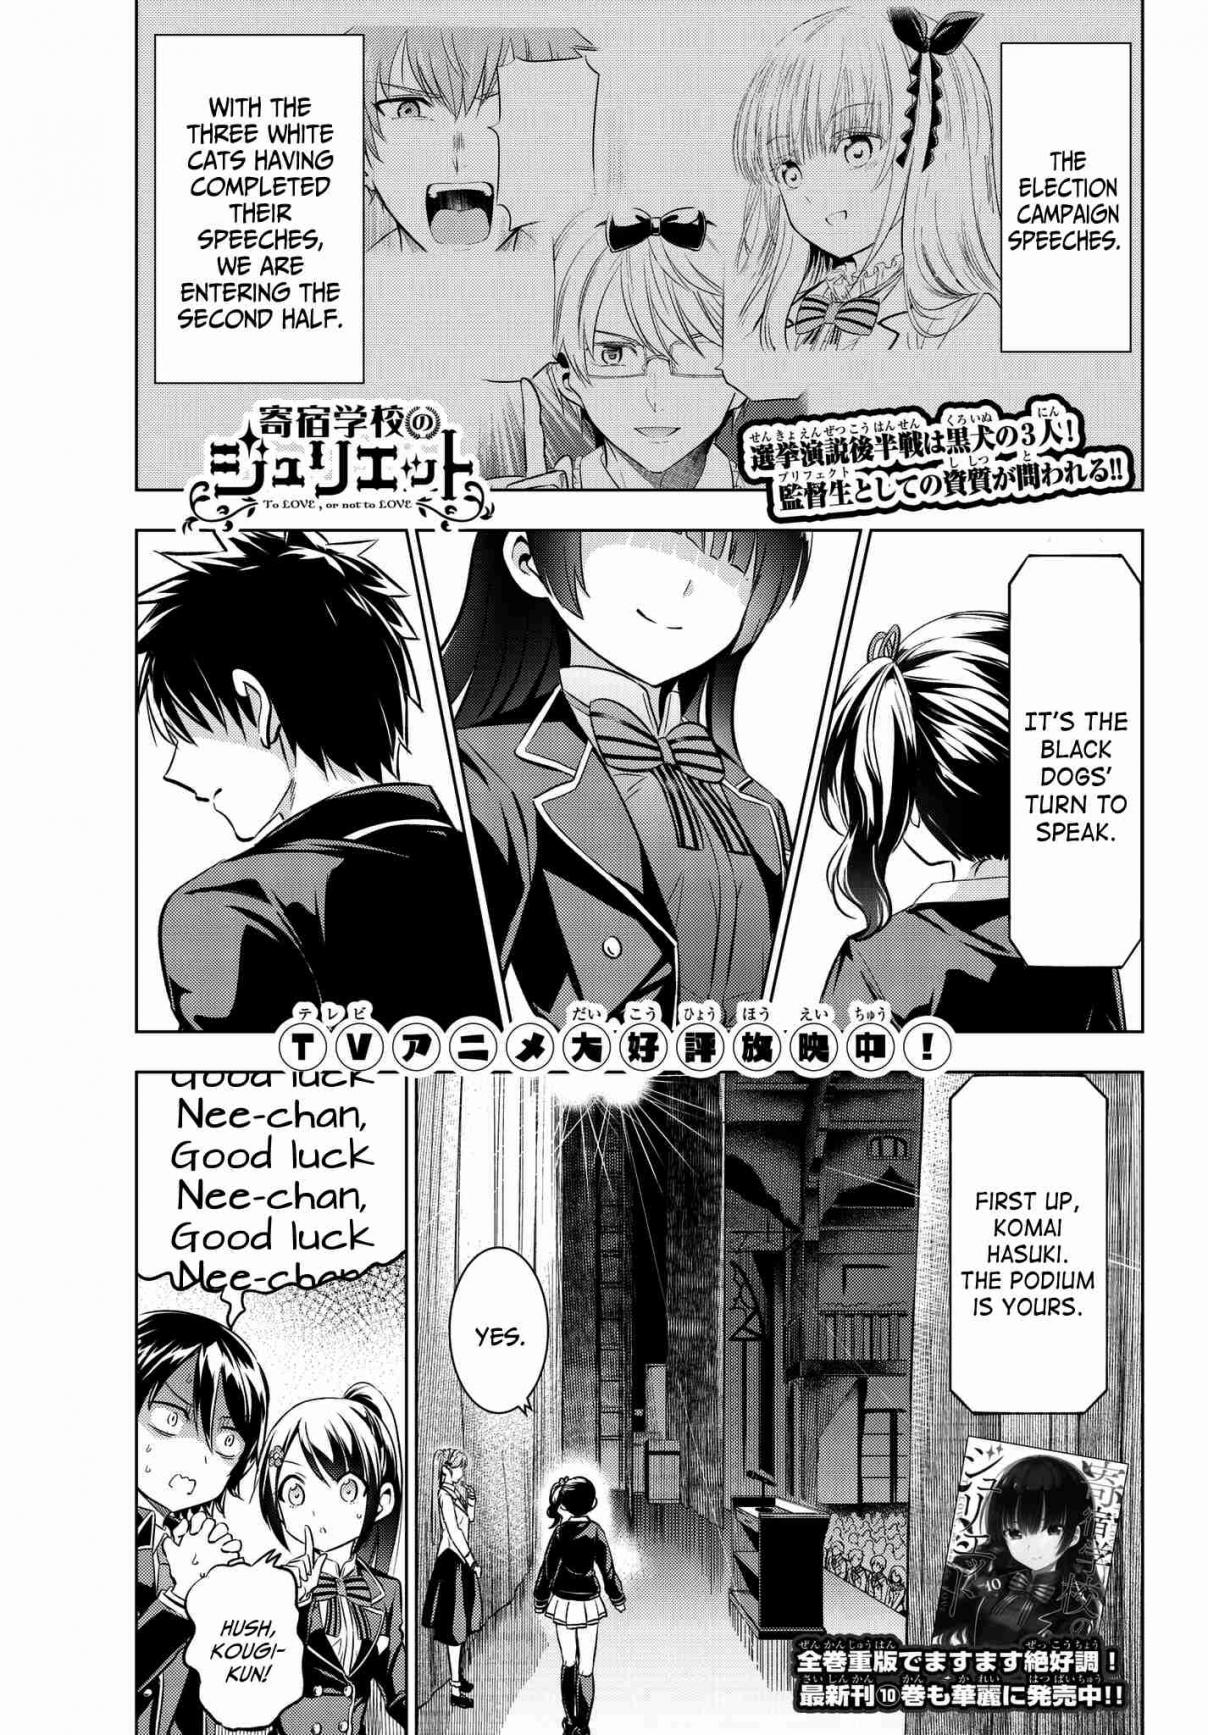 Kishuku Gakkou no Juliet Vol. 12 Ch. 81 Romio and the Student Election Assembly (Part II)